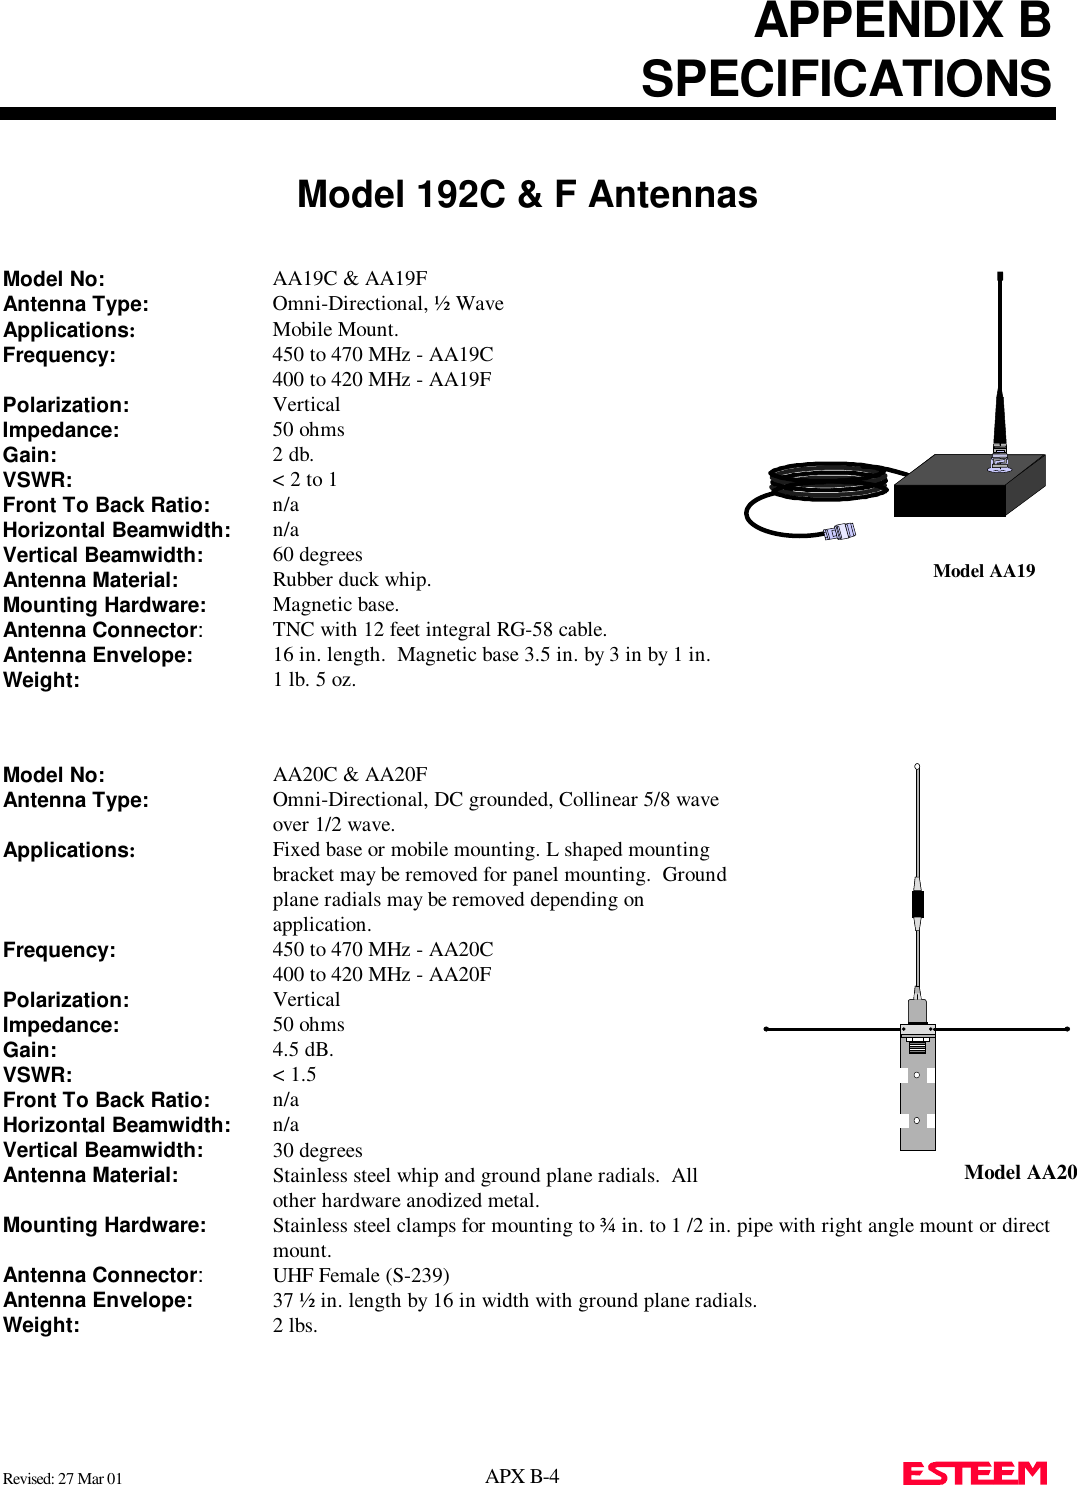 APPENDIX BSPECIFICATIONSModel 192C &amp; F AntennasRevised: 27 Mar 01 APX B-4  Model No: AA19C &amp; AA19FAntenna Type: Omni-Directional, ½ WaveApplications:Mobile Mount.Frequency: 450 to 470 MHz - AA19C400 to 420 MHz - AA19FPolarization: VerticalImpedance: 50 ohmsGain: 2 db.VSWR: &lt; 2 to 1Front To Back Ratio: n/aHorizontal Beamwidth: n/aVertical Beamwidth:   60 degreesAntenna Material: Rubber duck whip.Mounting Hardware:   Magnetic base.Antenna Connector:TNC with 12 feet integral RG-58 cable.Antenna Envelope: 16 in. length.  Magnetic base 3.5 in. by 3 in by 1 in.Weight:   1 lb. 5 oz.Model No: AA20C &amp; AA20FAntenna Type: Omni-Directional, DC grounded, Collinear 5/8 waveover 1/2 wave.Applications:Fixed base or mobile mounting. L shaped mountingbracket may be removed for panel mounting.  Groundplane radials may be removed depending onapplication.Frequency: 450 to 470 MHz - AA20C400 to 420 MHz - AA20FPolarization: VerticalImpedance: 50 ohmsGain: 4.5 dB.VSWR: &lt; 1.5Front To Back Ratio: n/aHorizontal Beamwidth: n/aVertical Beamwidth:   30 degreesAntenna Material: Stainless steel whip and ground plane radials.  Allother hardware anodized metal.Mounting Hardware:   Stainless steel clamps for mounting to ¾ in. to 1 /2 in. pipe with right angle mount or directmount.Antenna Connector:UHF Female (S-239)Antenna Envelope: 37 ½ in. length by 16 in width with ground plane radials.Weight:   2 lbs.Model AA19Model AA20